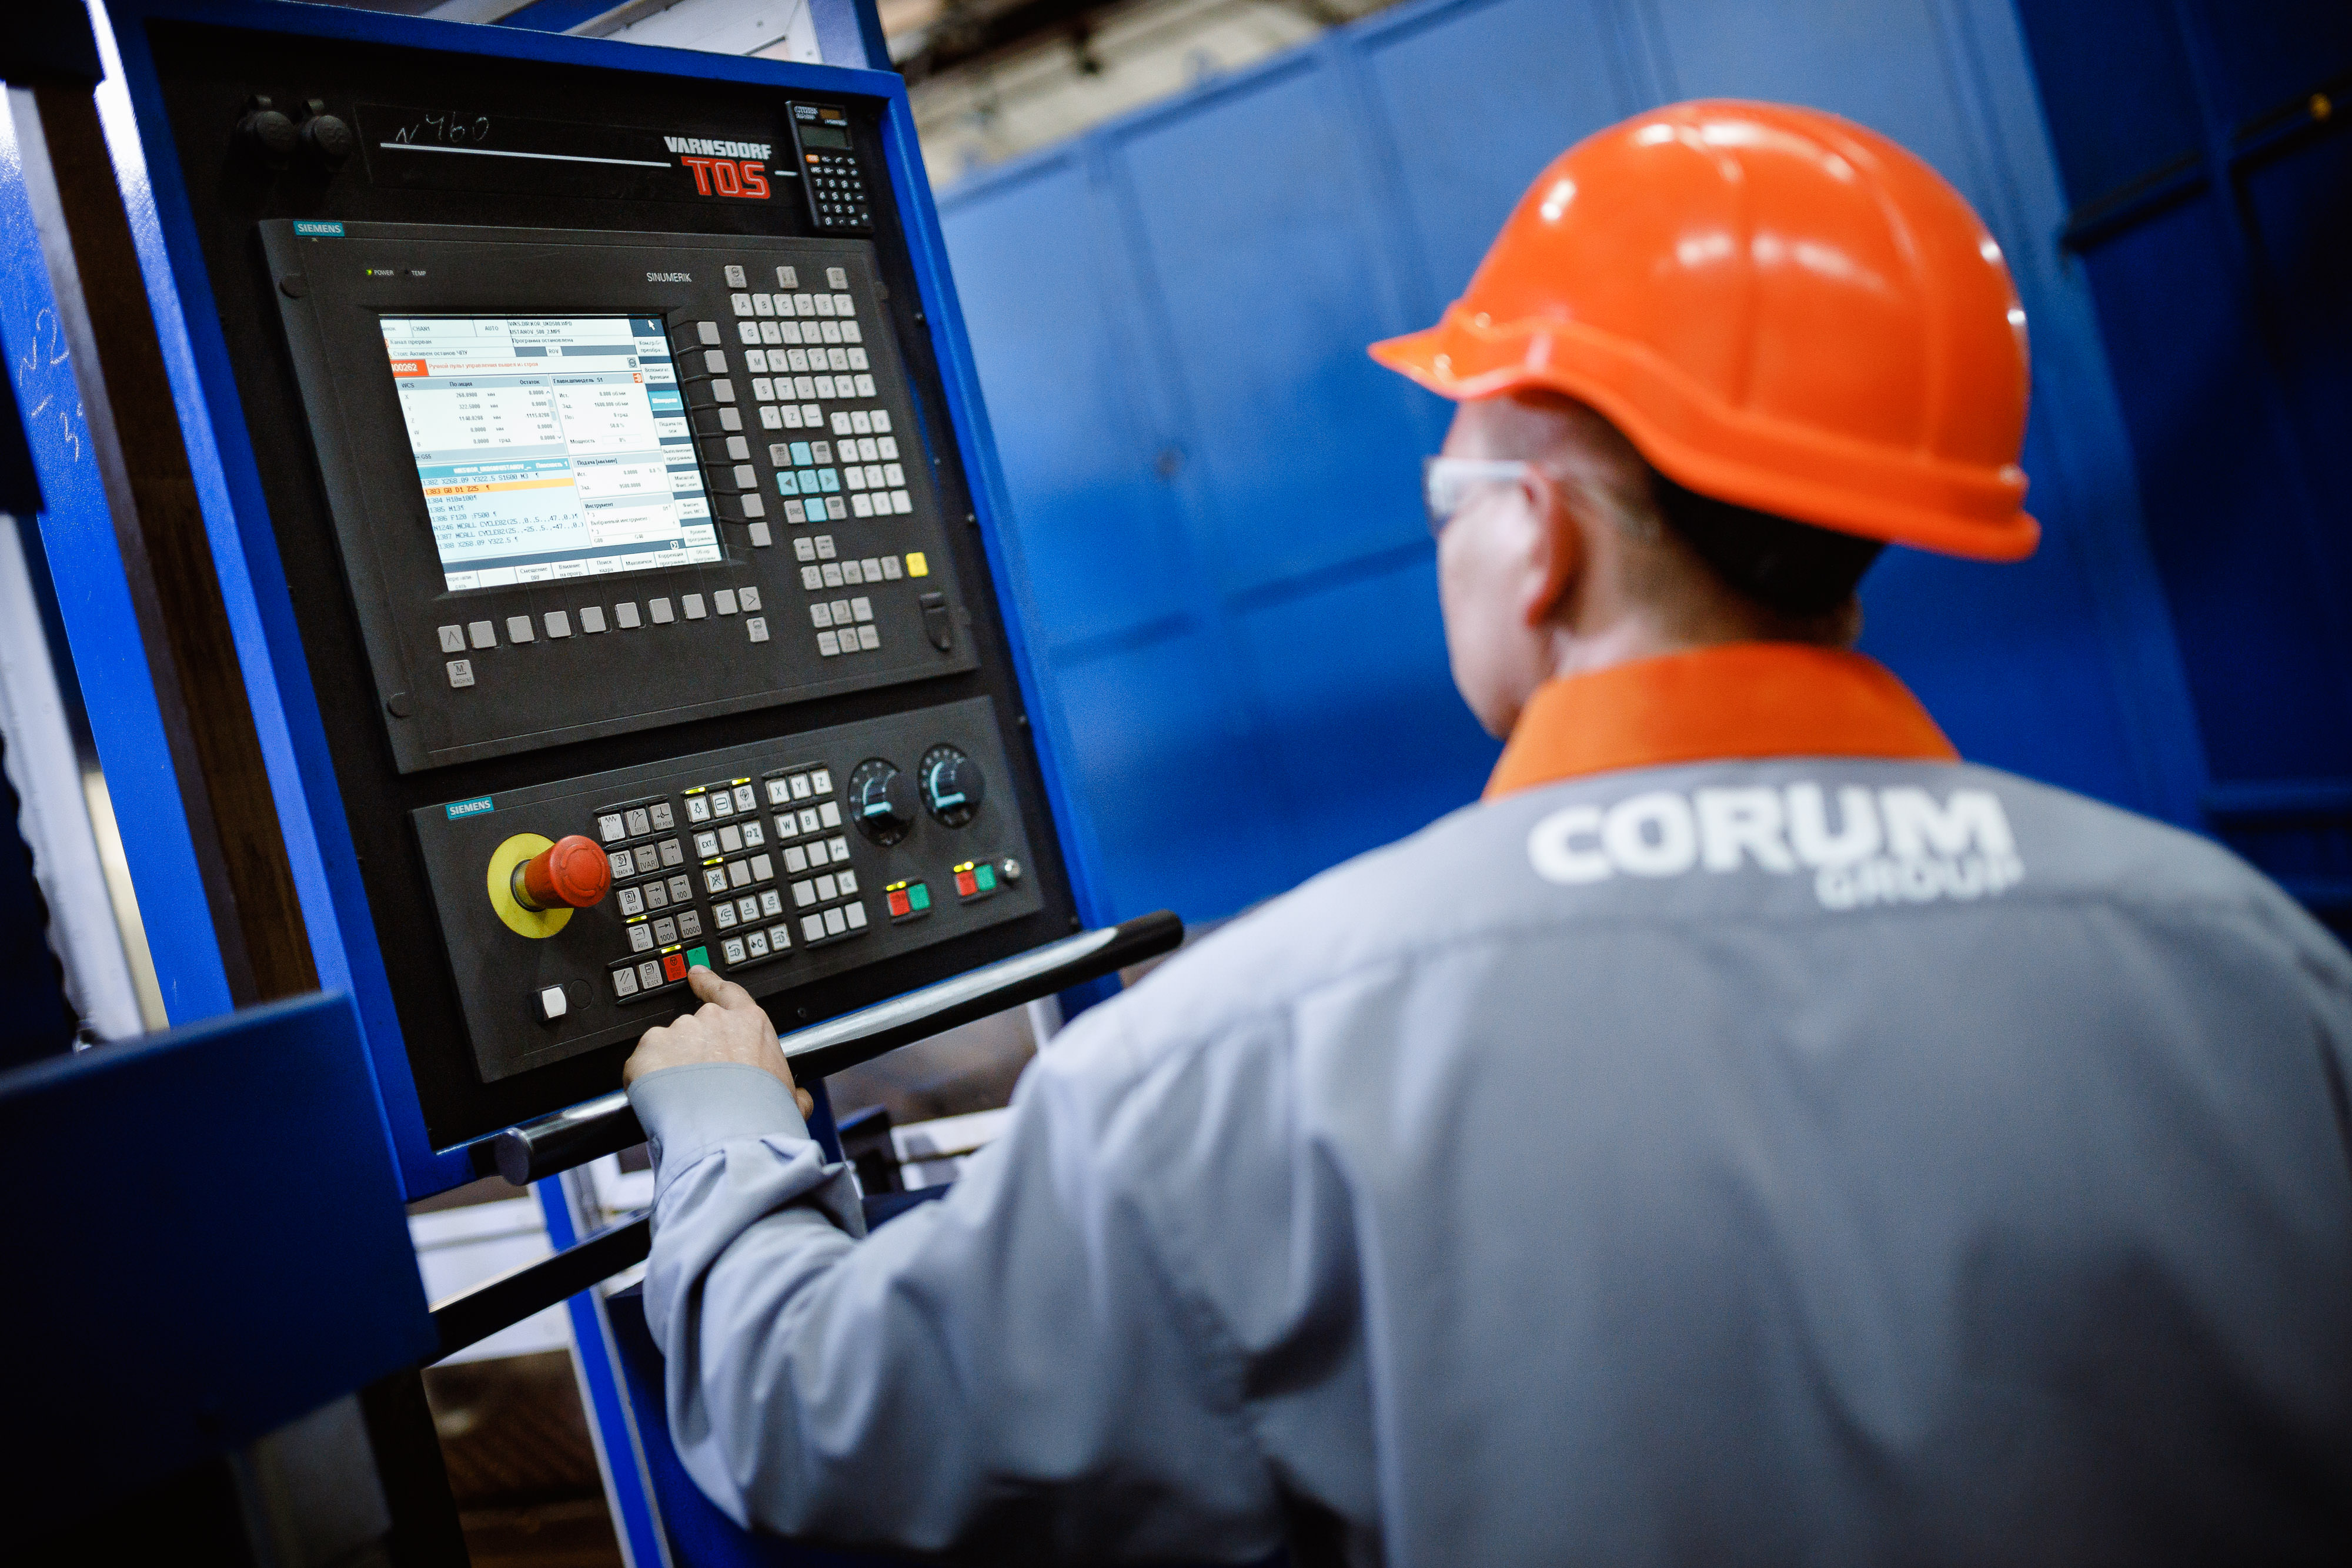 Corum Group introduces digital planning into industrial production